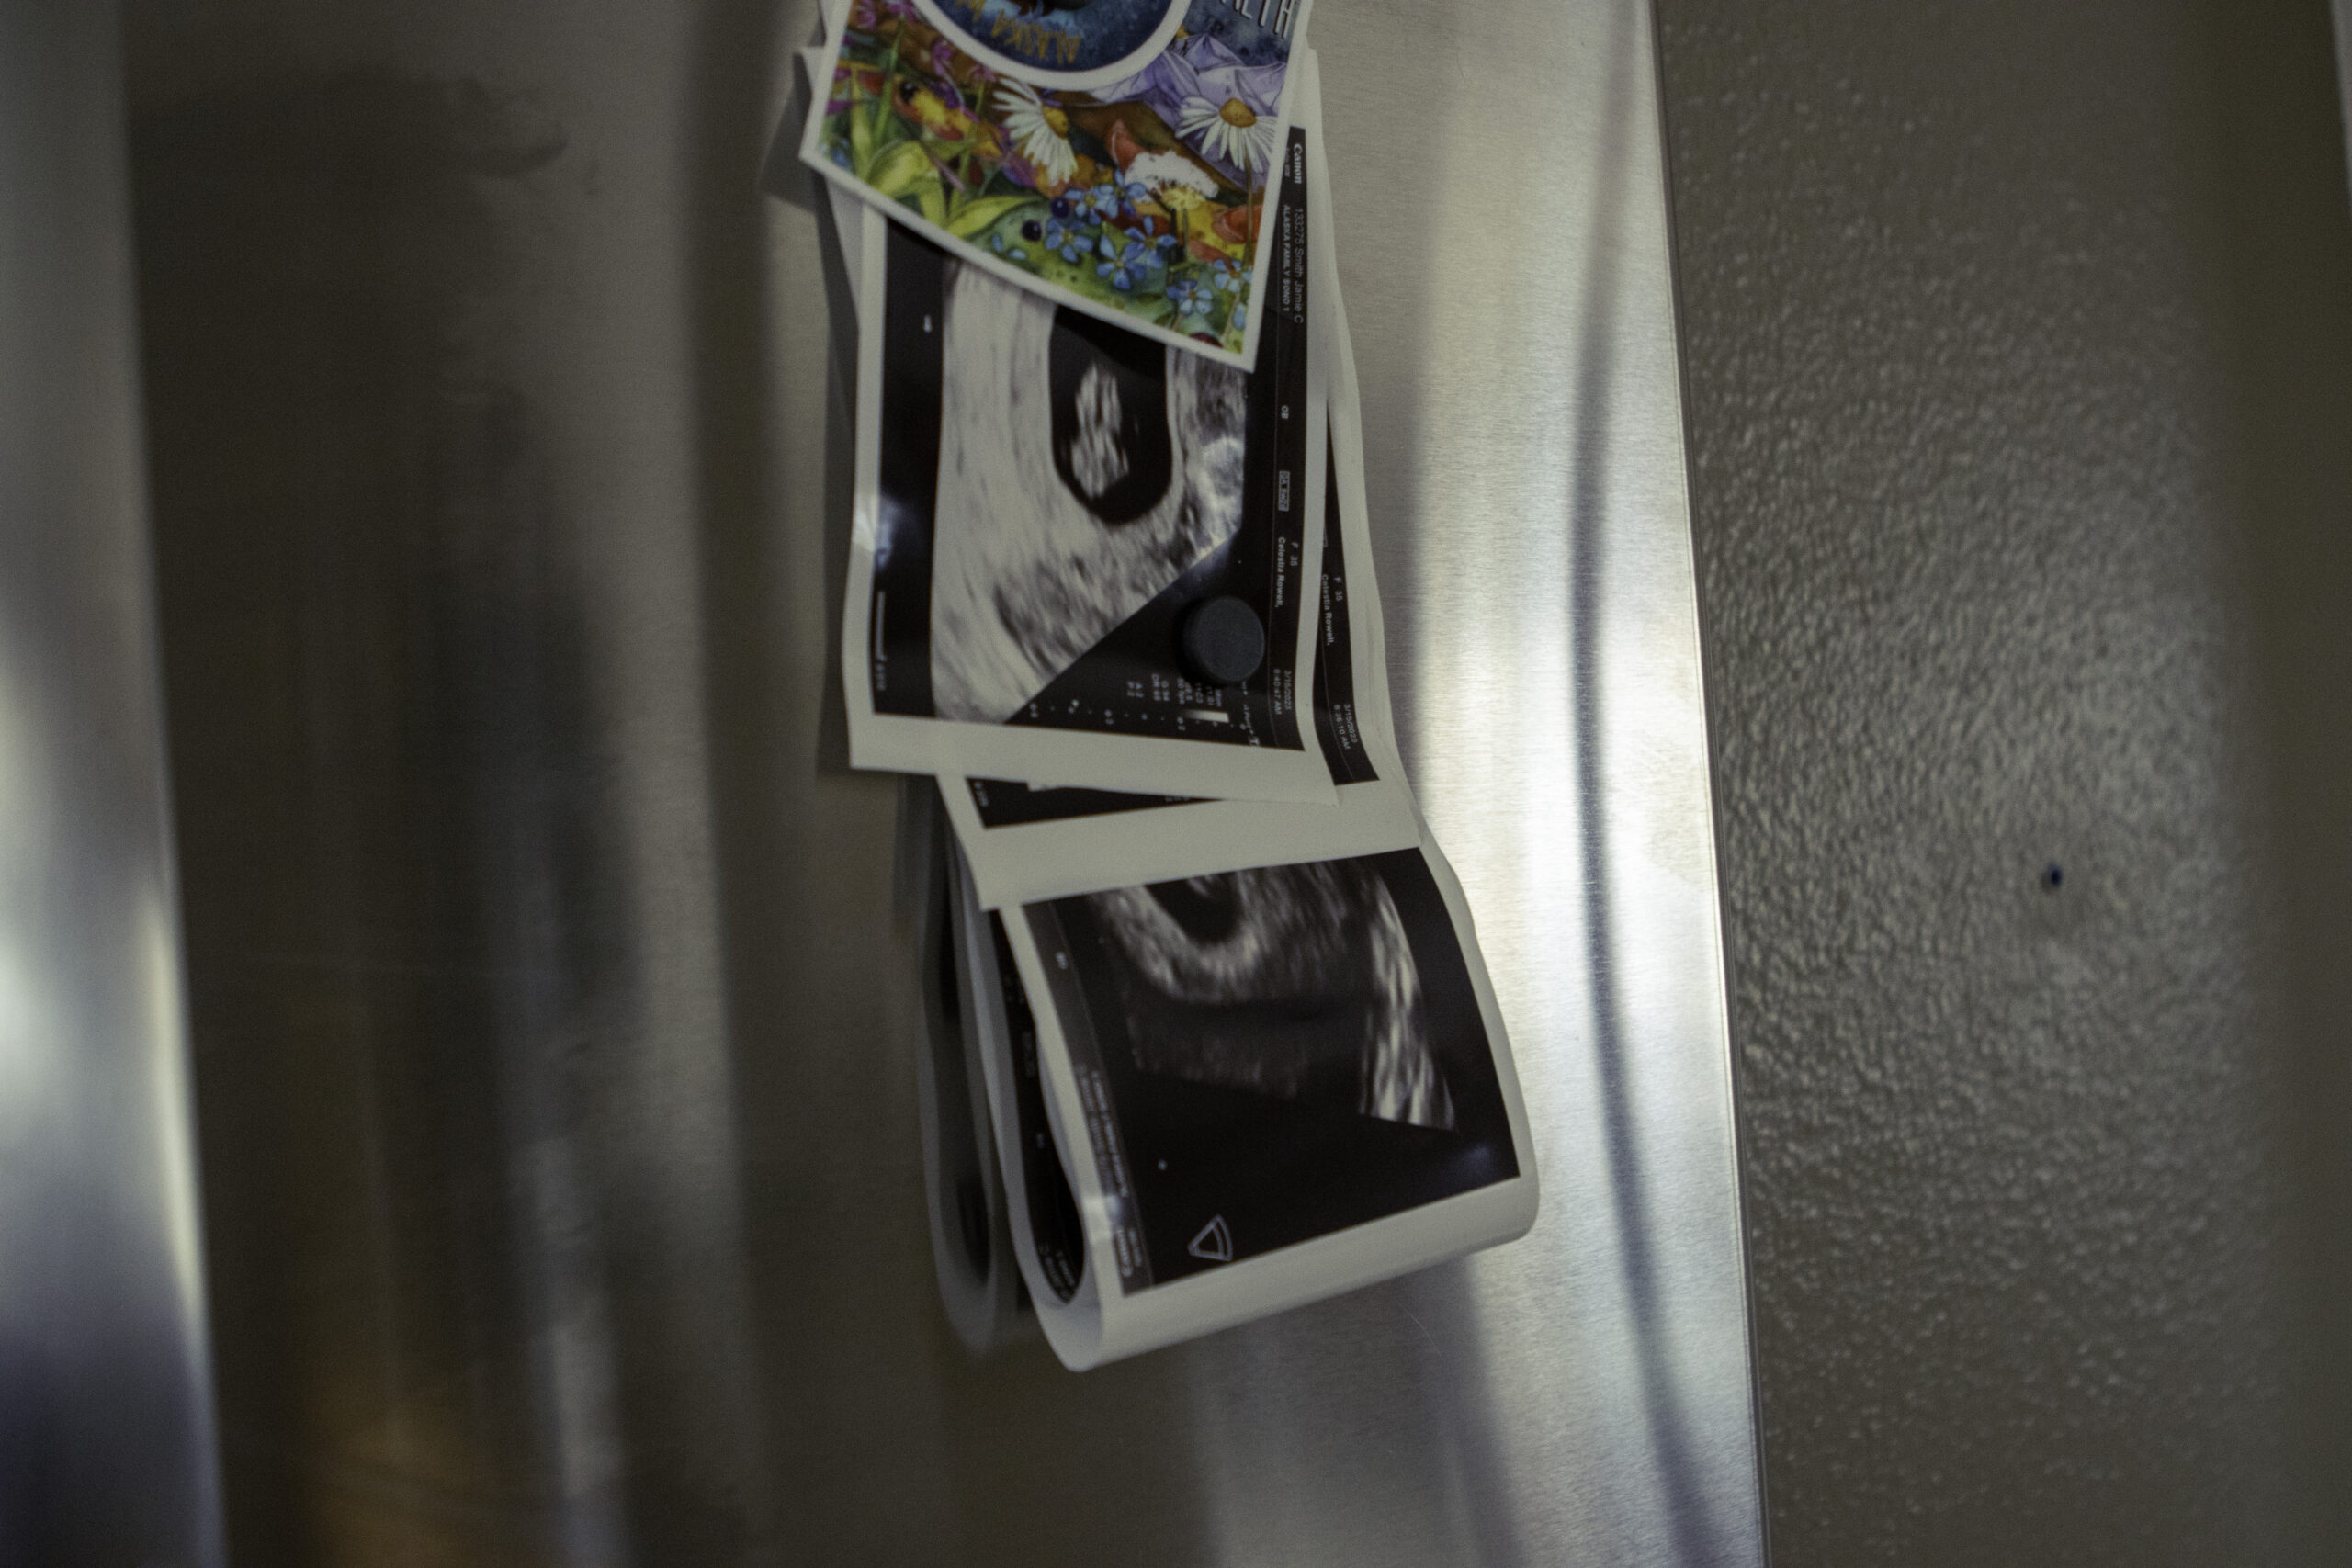 an ultrasound on the refrigerator